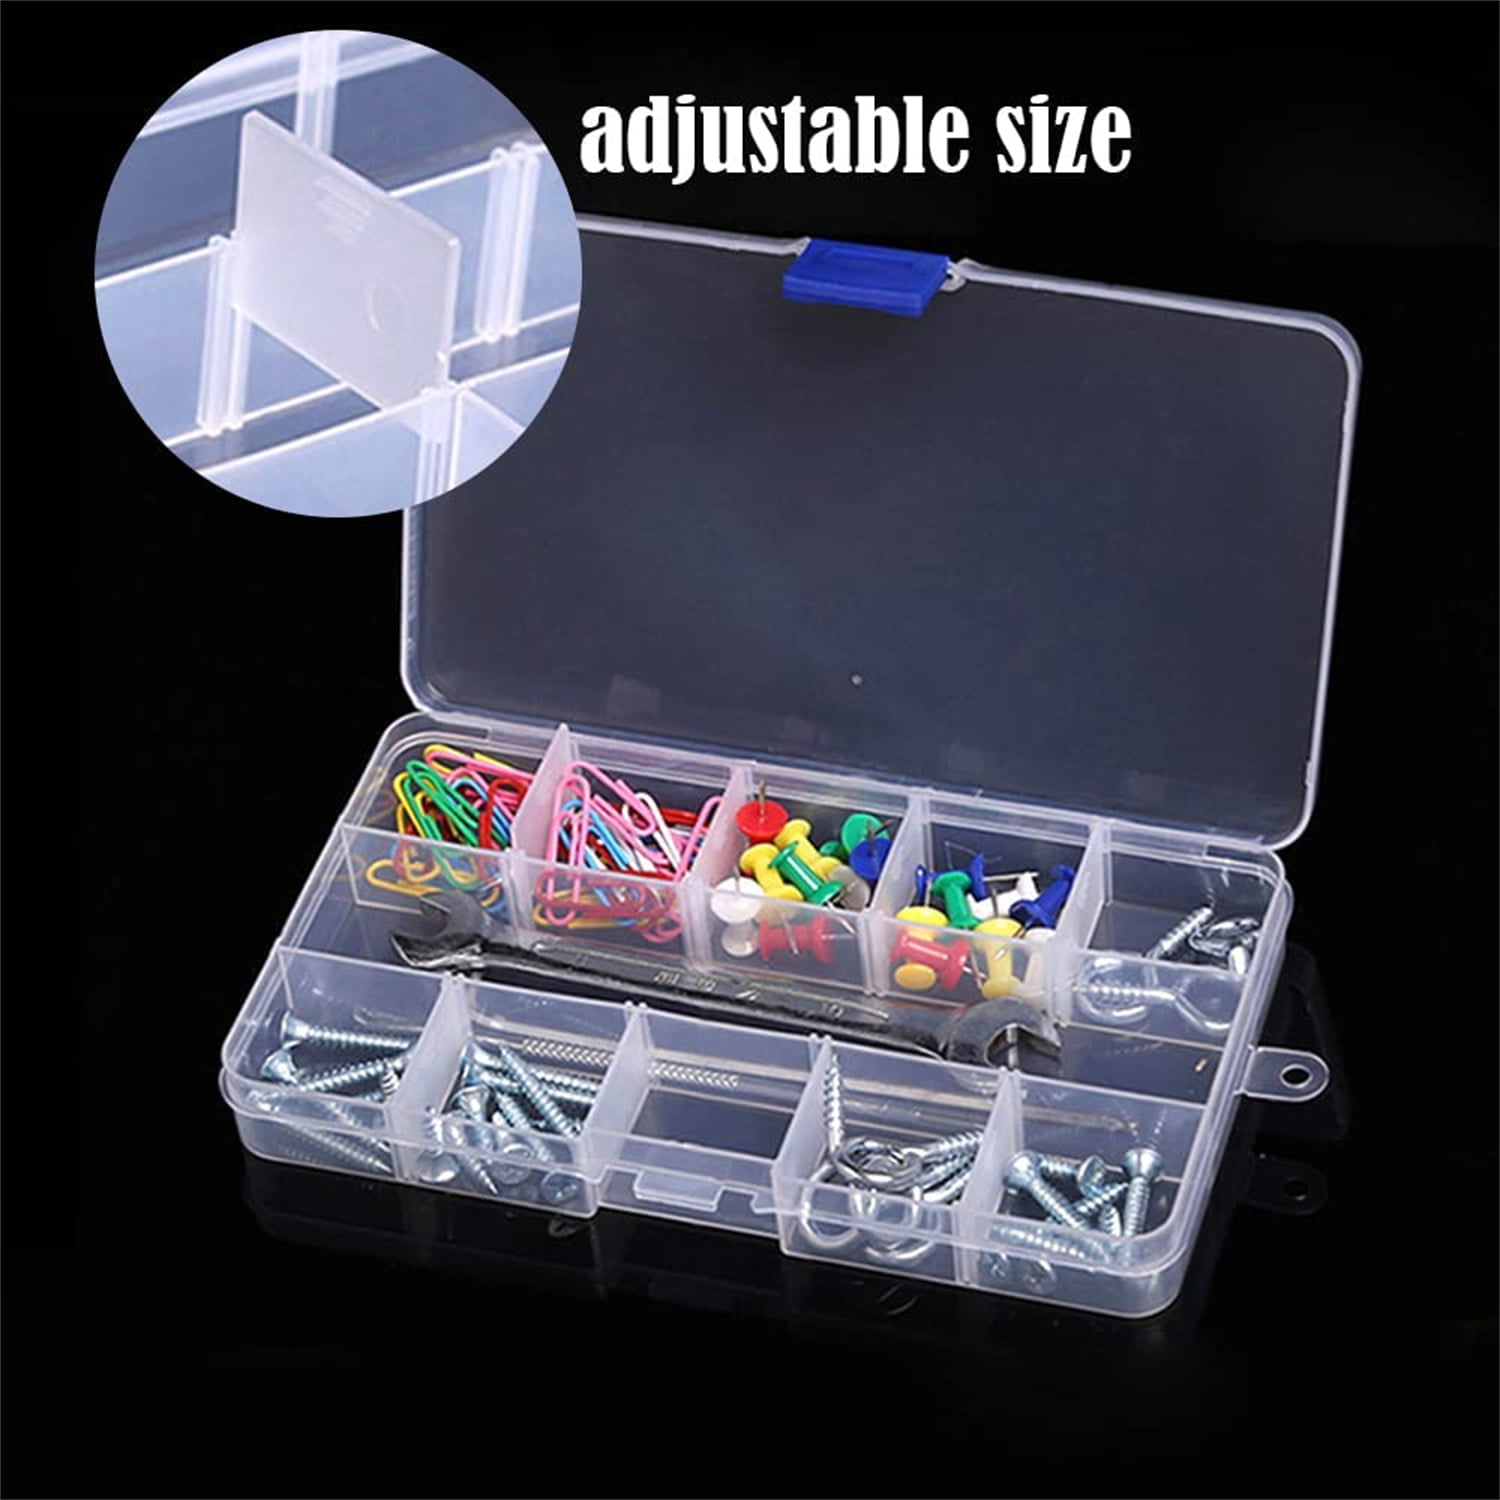 NBEADS 1 Pc White Plastic Jewelry Dividers Box Organizer, 15 Compartments  Adjustable Jewelry Bead Case Storage Container for Jewelry, Tools and  Fishing Lures 